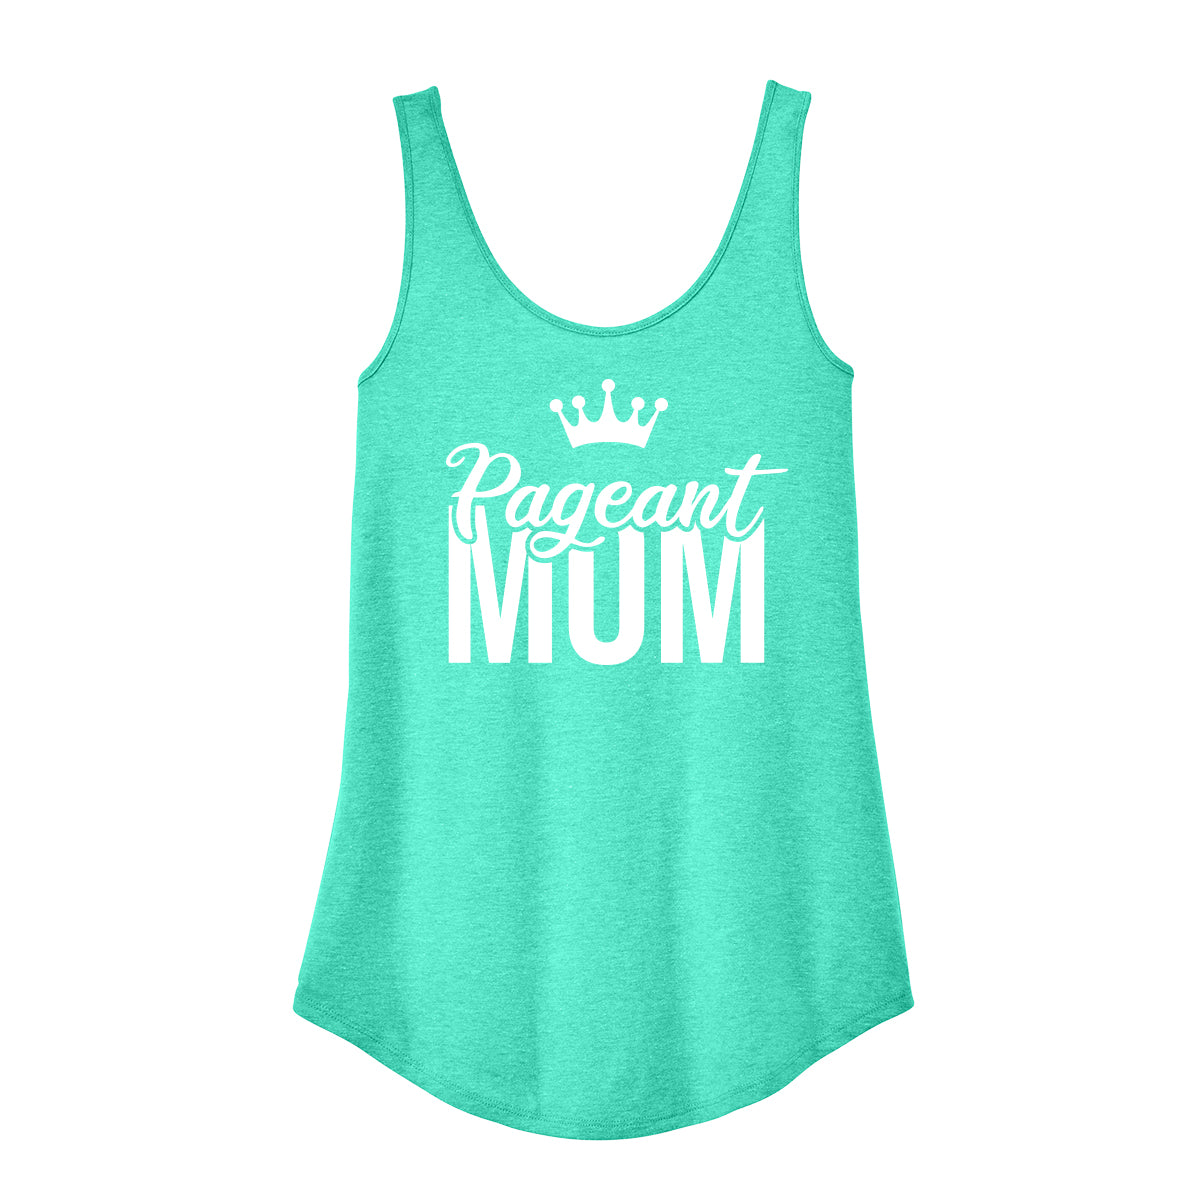 Pageant Mom Womens Tank